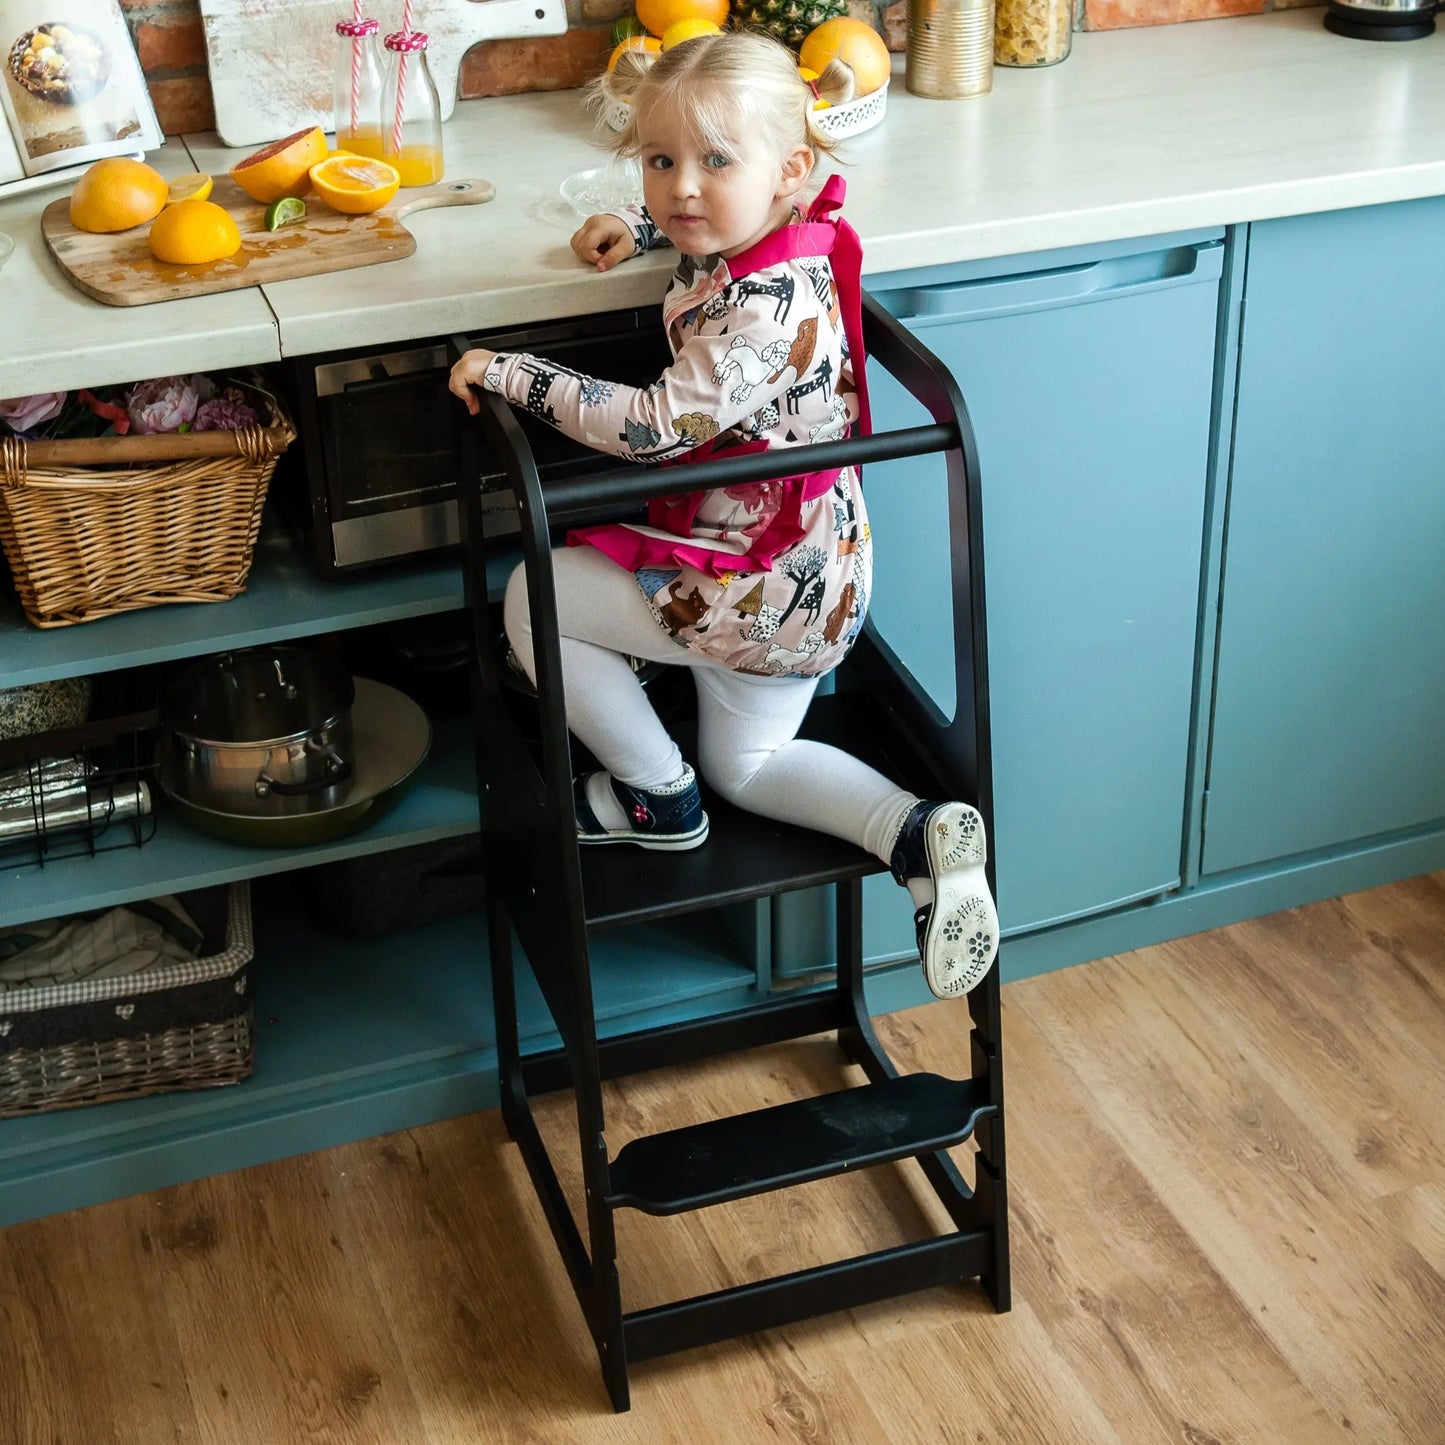 A child sits on a Montessori Learning Tower Step Stool in a kitchen, reaching for items. Adjustable height, sturdy Baltic birch plywood, handmade in Latvia. Encourages independence and safe kitchen interaction.